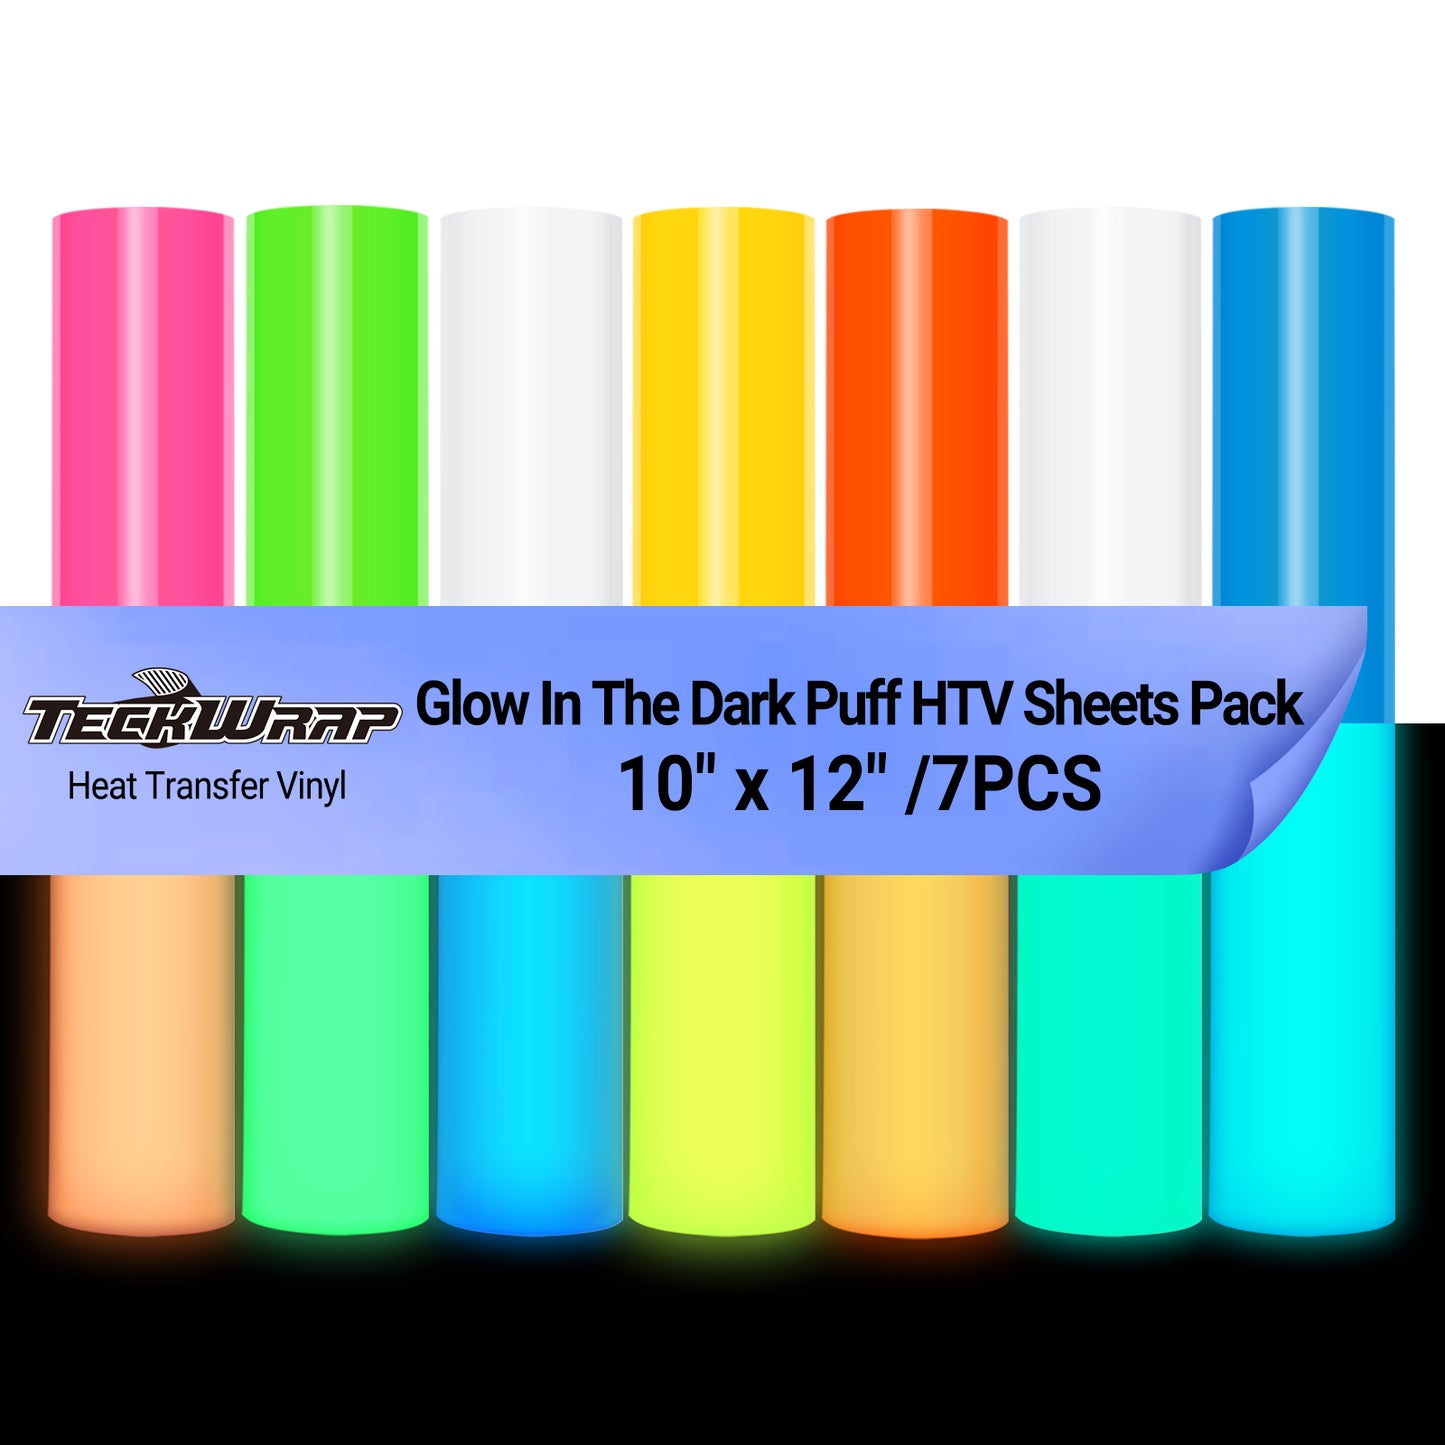 Glow In The Dark Puff HTV Sheets Pack( 7 PCS)